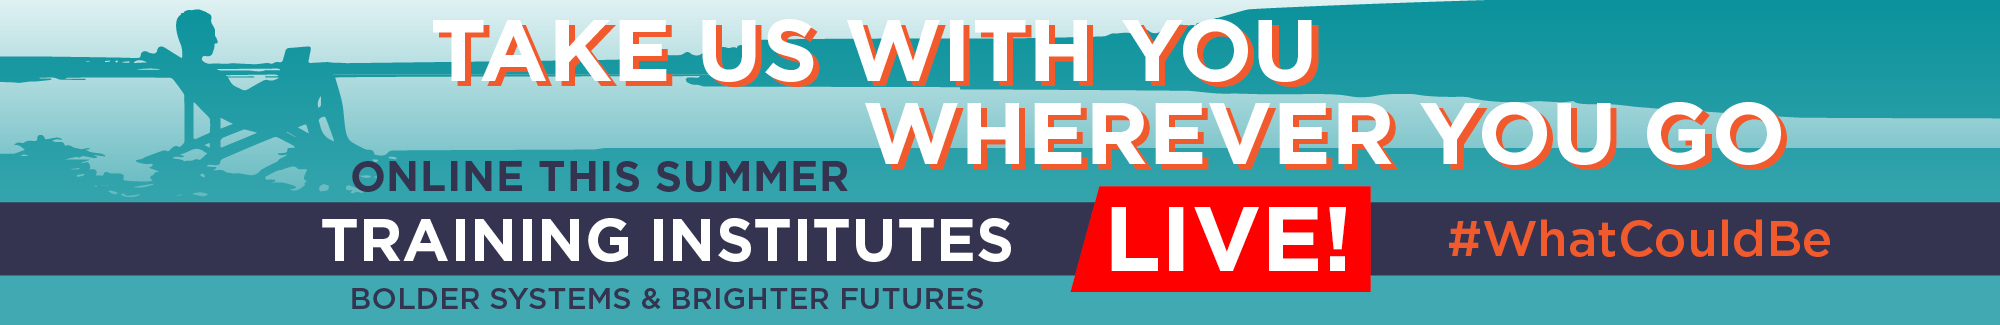 Join Us Online, #WhatCouldBe, Training Institutes Live! Bolder systems and brighter futures for children, youth, young adults, and their families